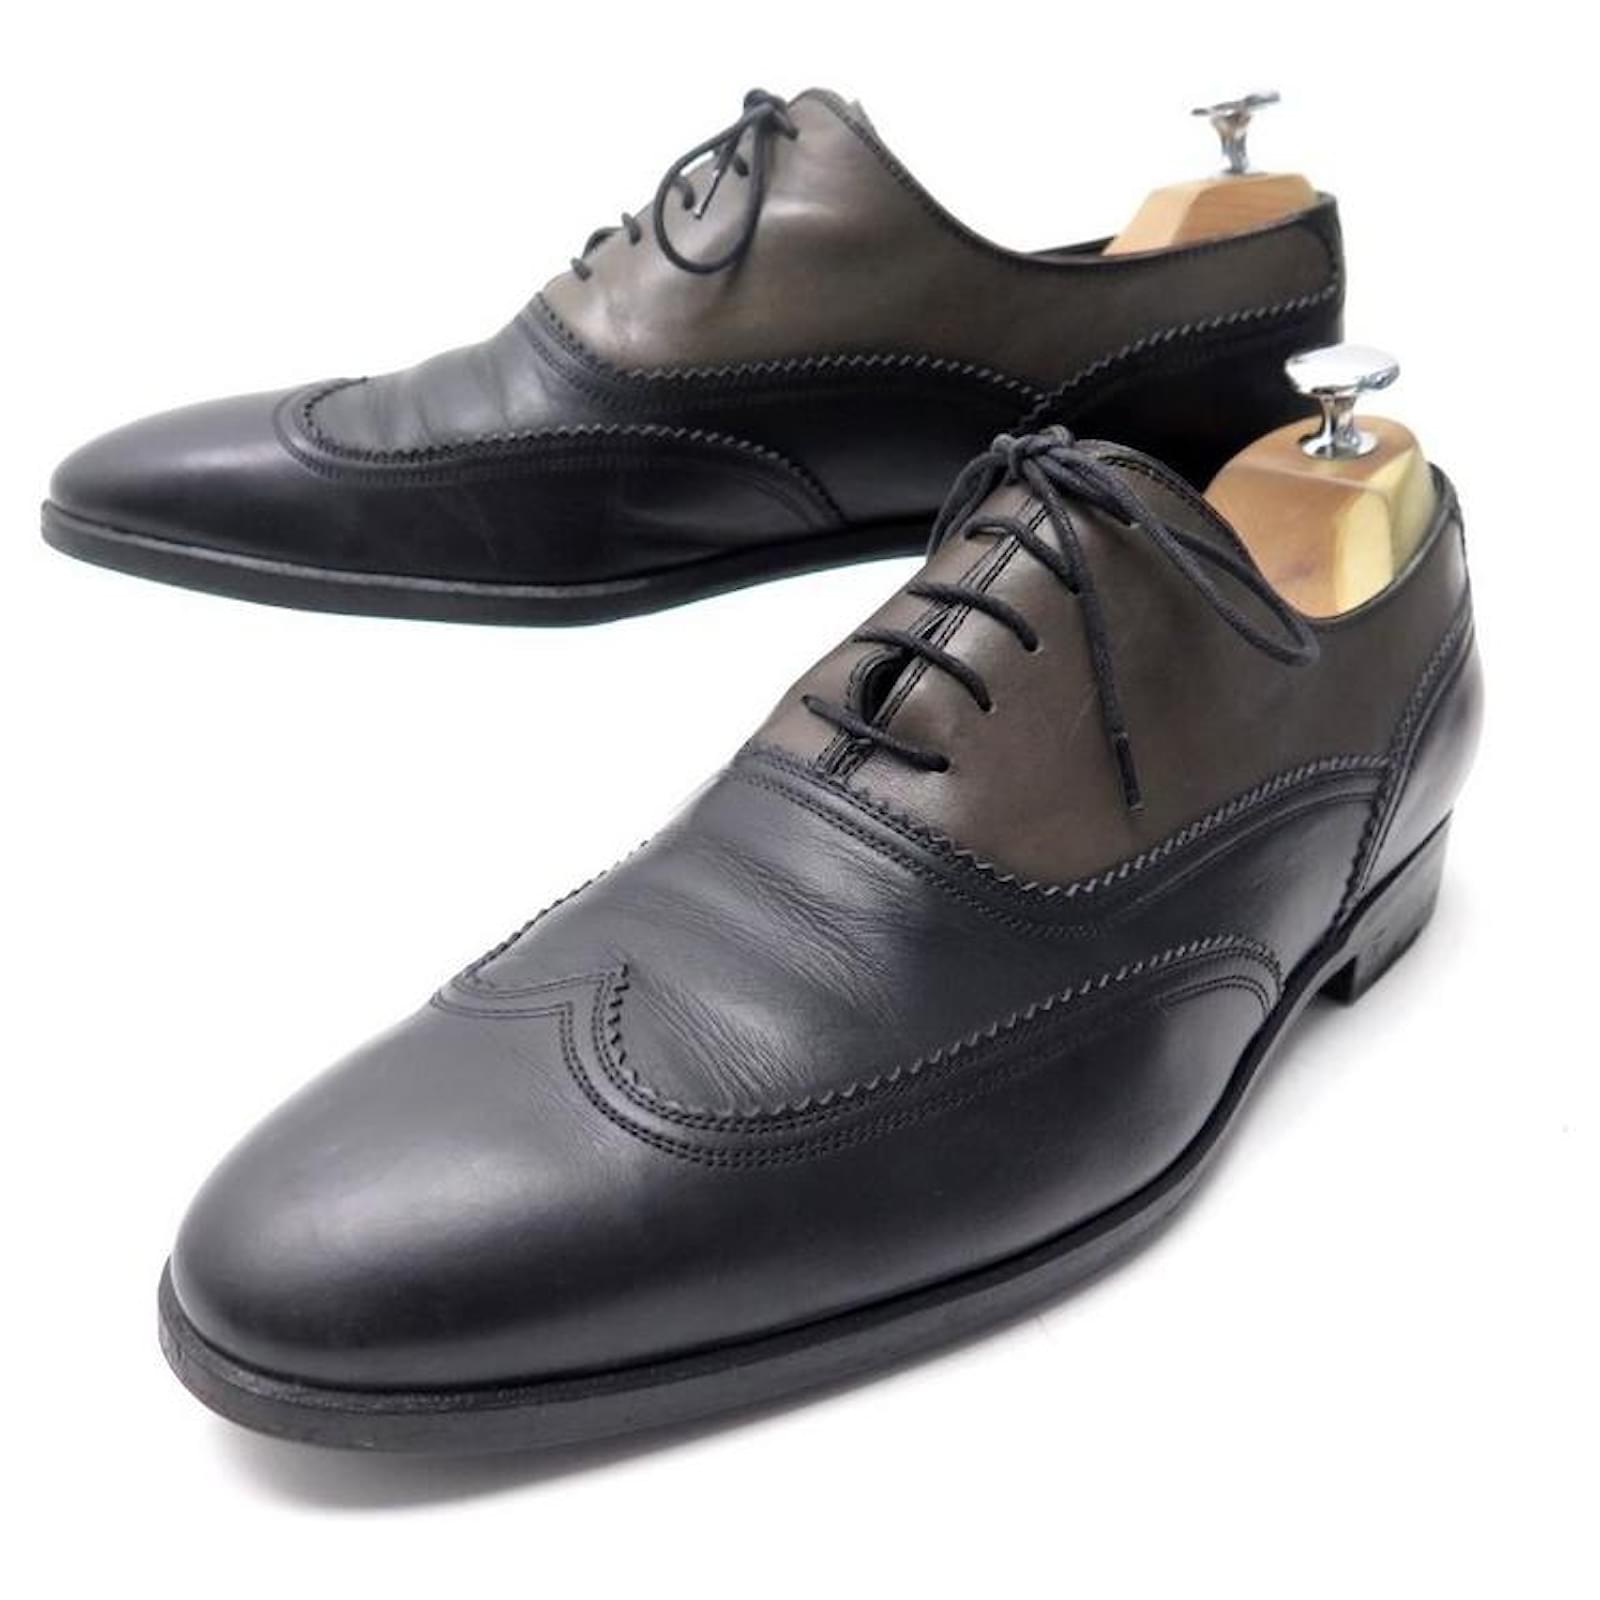 LOUIS VUITTON OXFORD SHOES 8.5 42.5 IN BLACK & BROWN TWO-TONE LEATHER ...